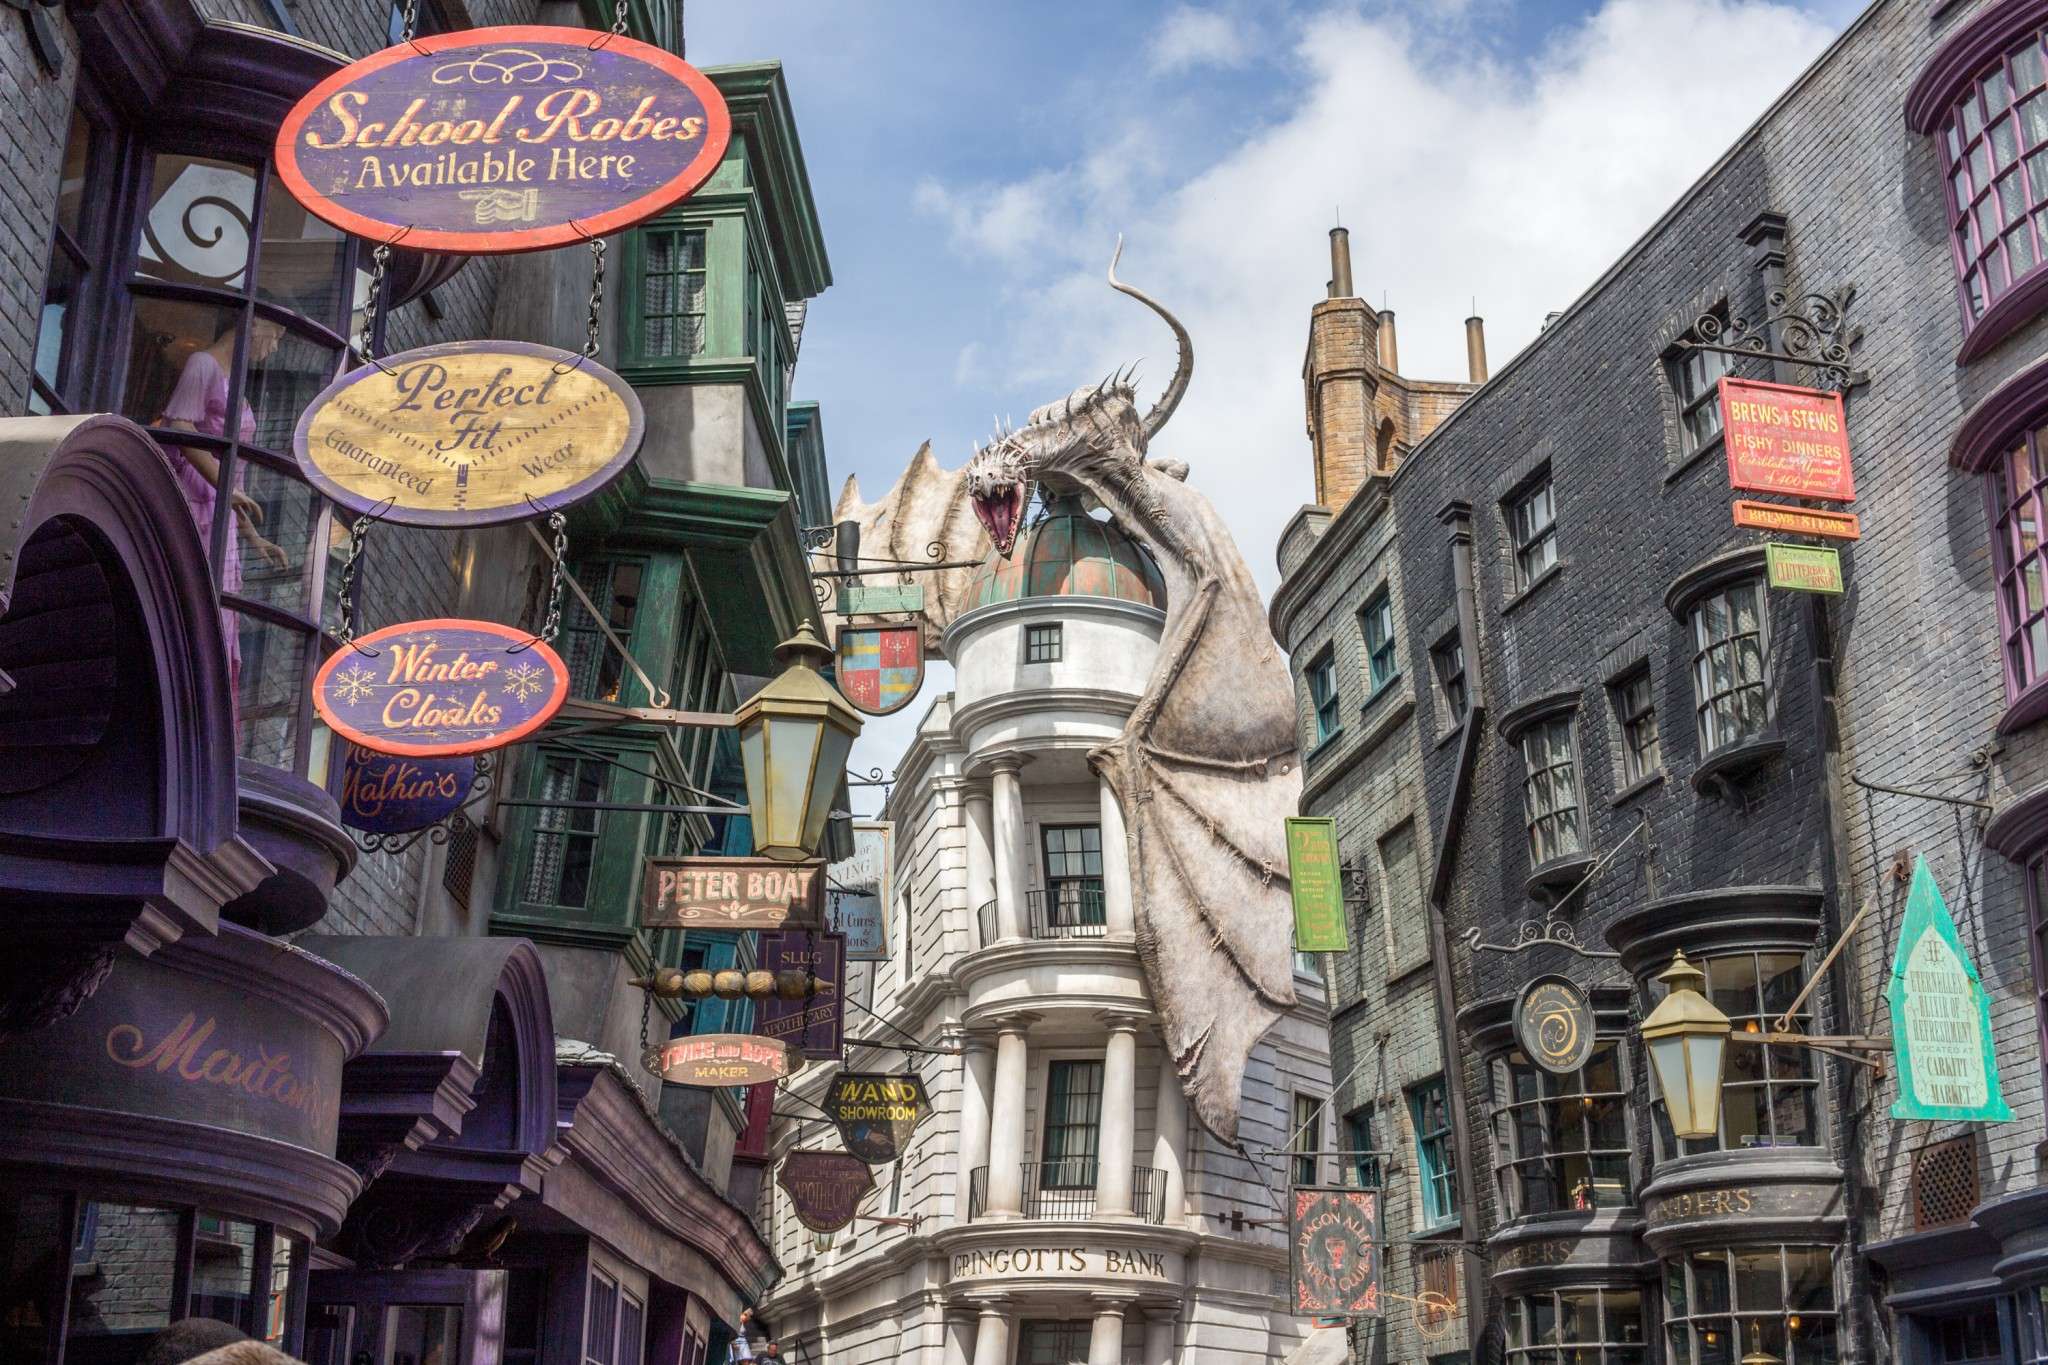 What to See at Harry Potter World, Diagon Alley